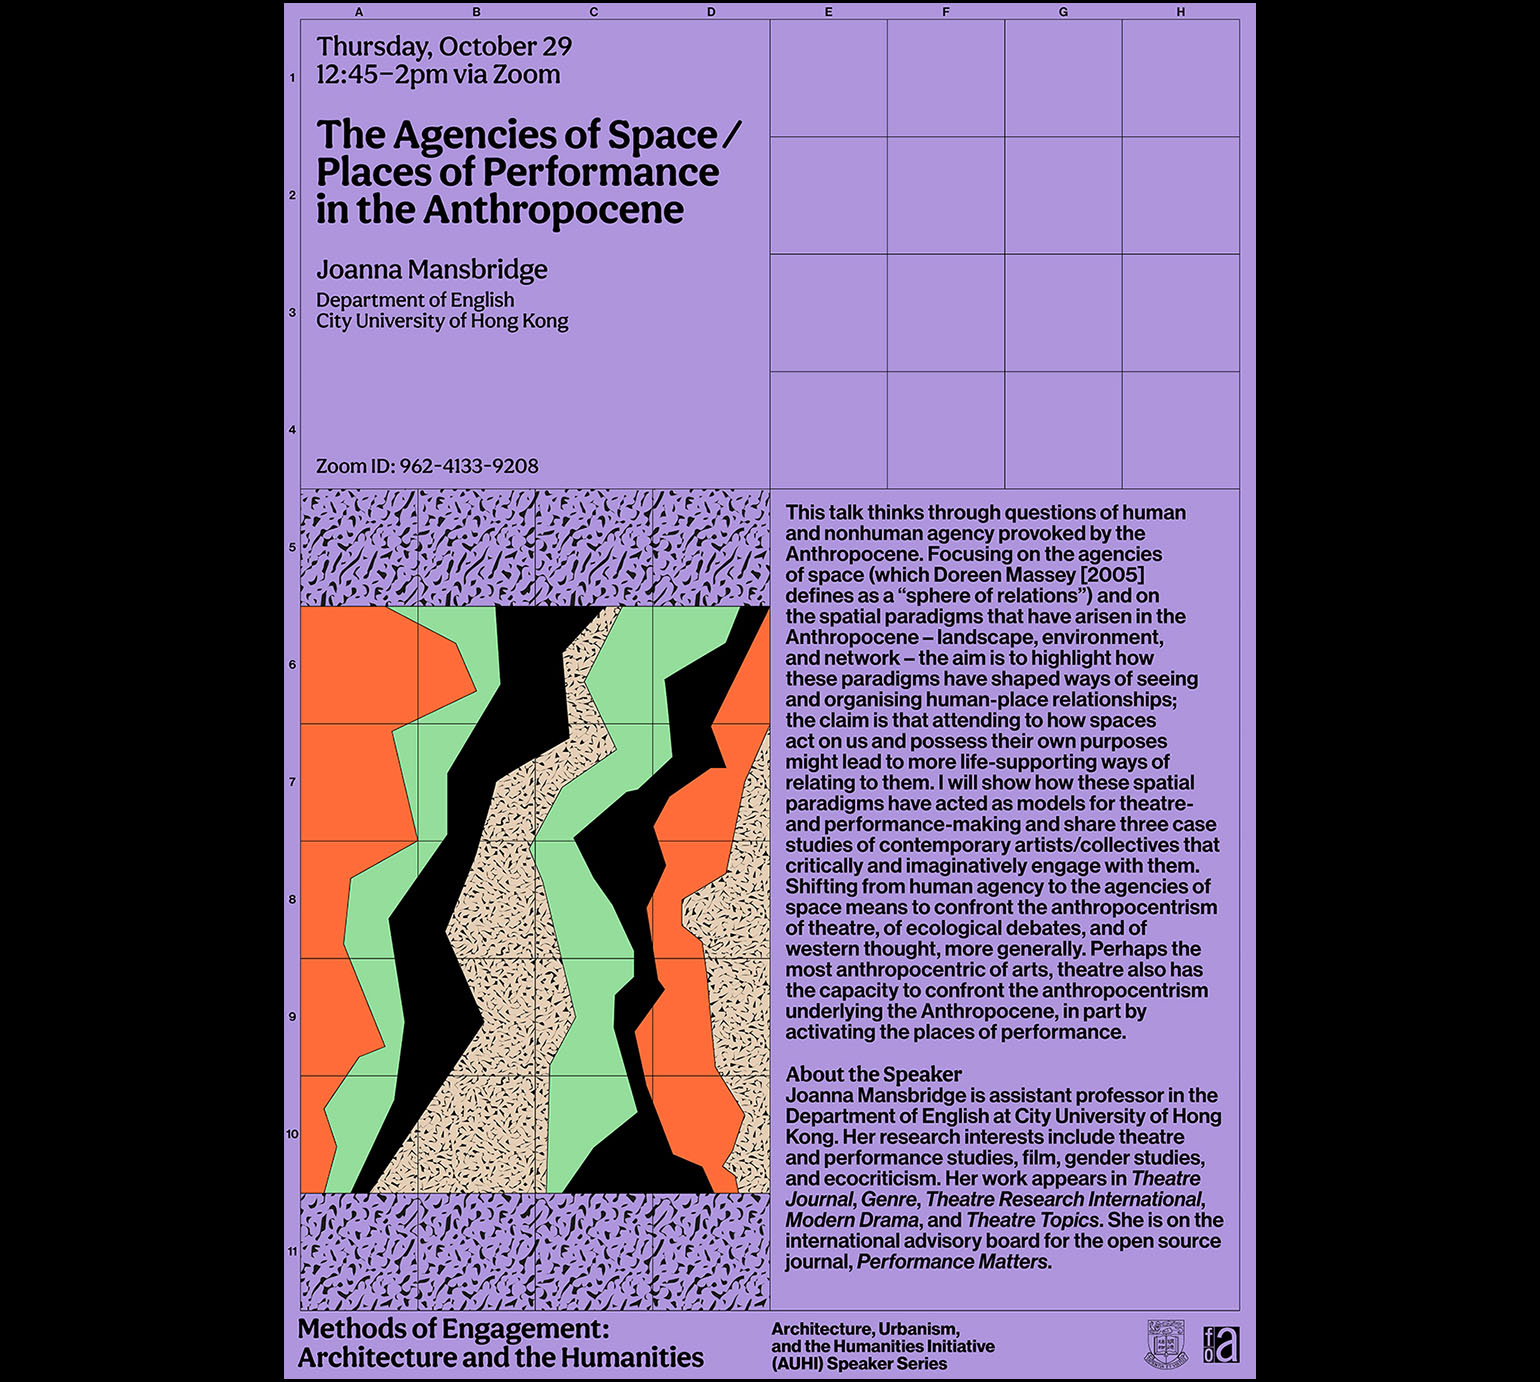 'The Agencies of Space / Places of Performance in the Anthropocene' by Joanna Mansbridge